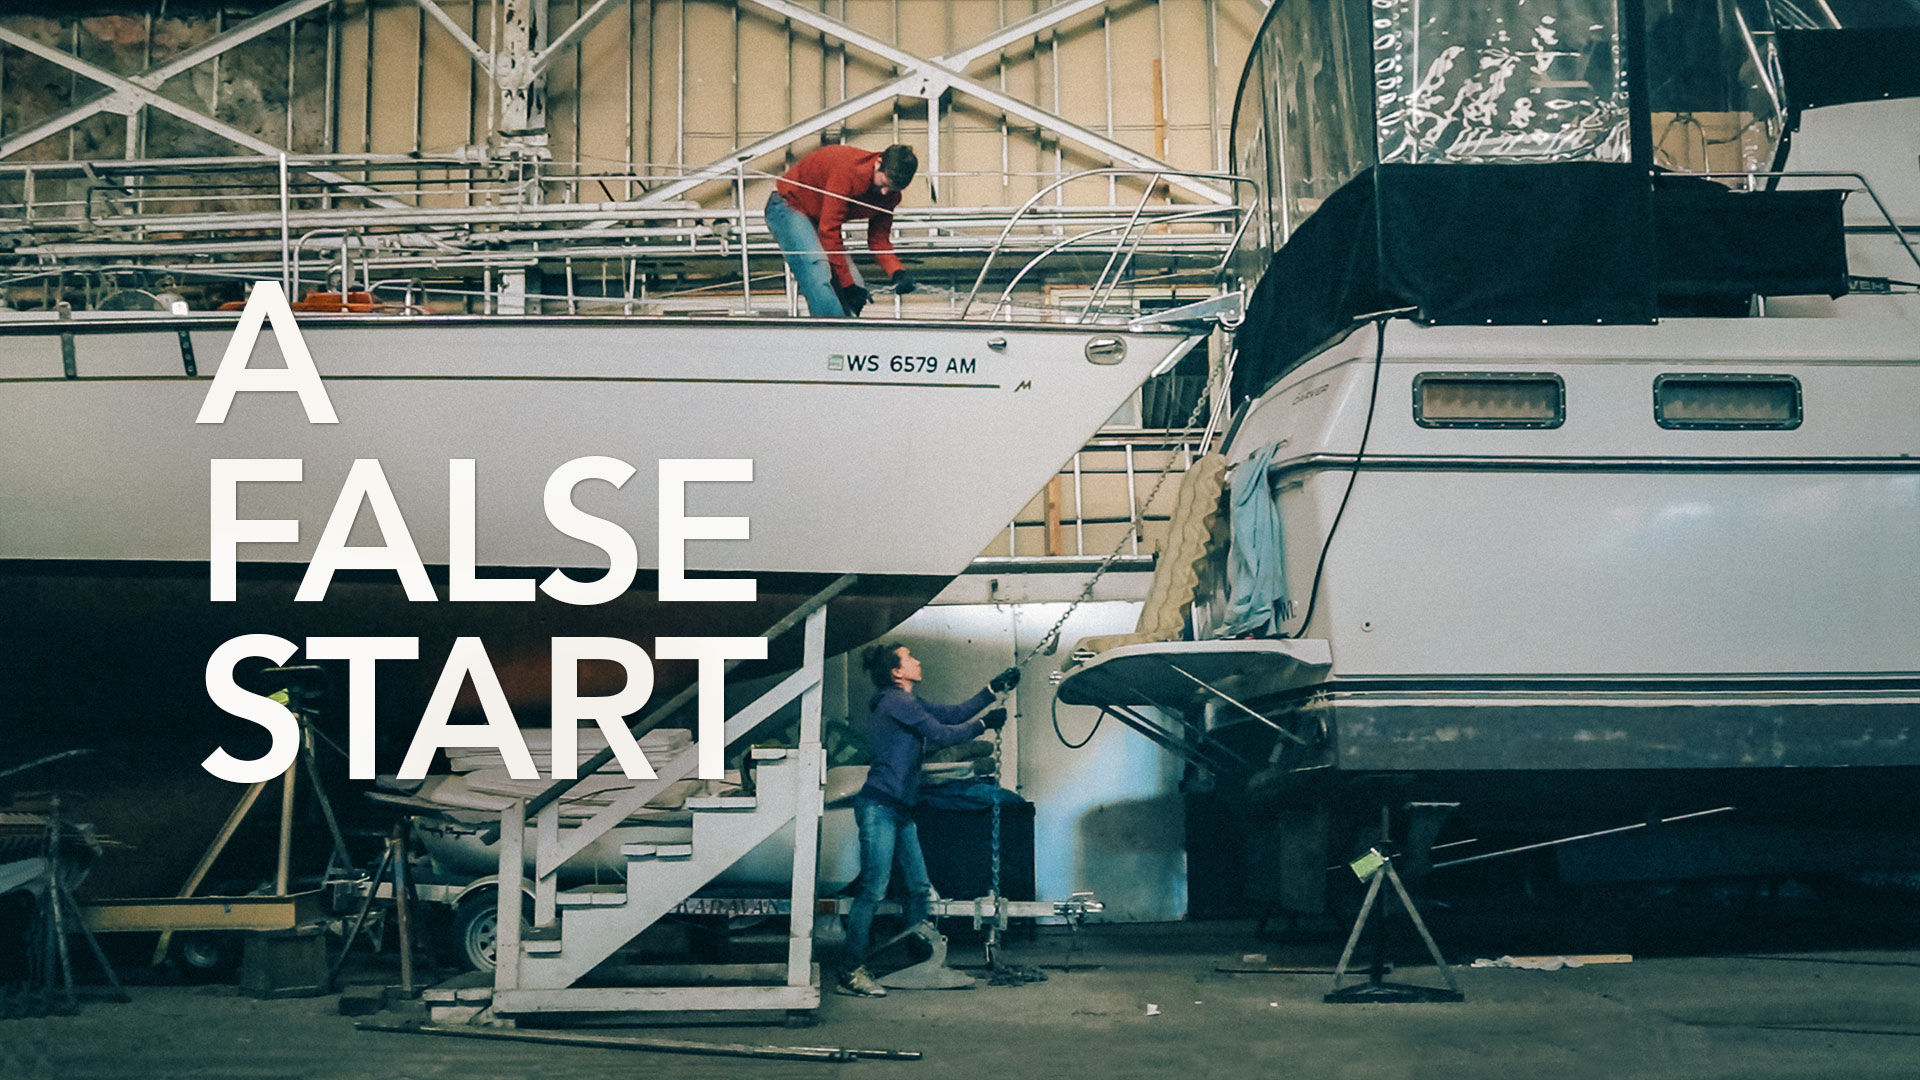 Working on a sailboat in a boatyard | Sailing Soulianis